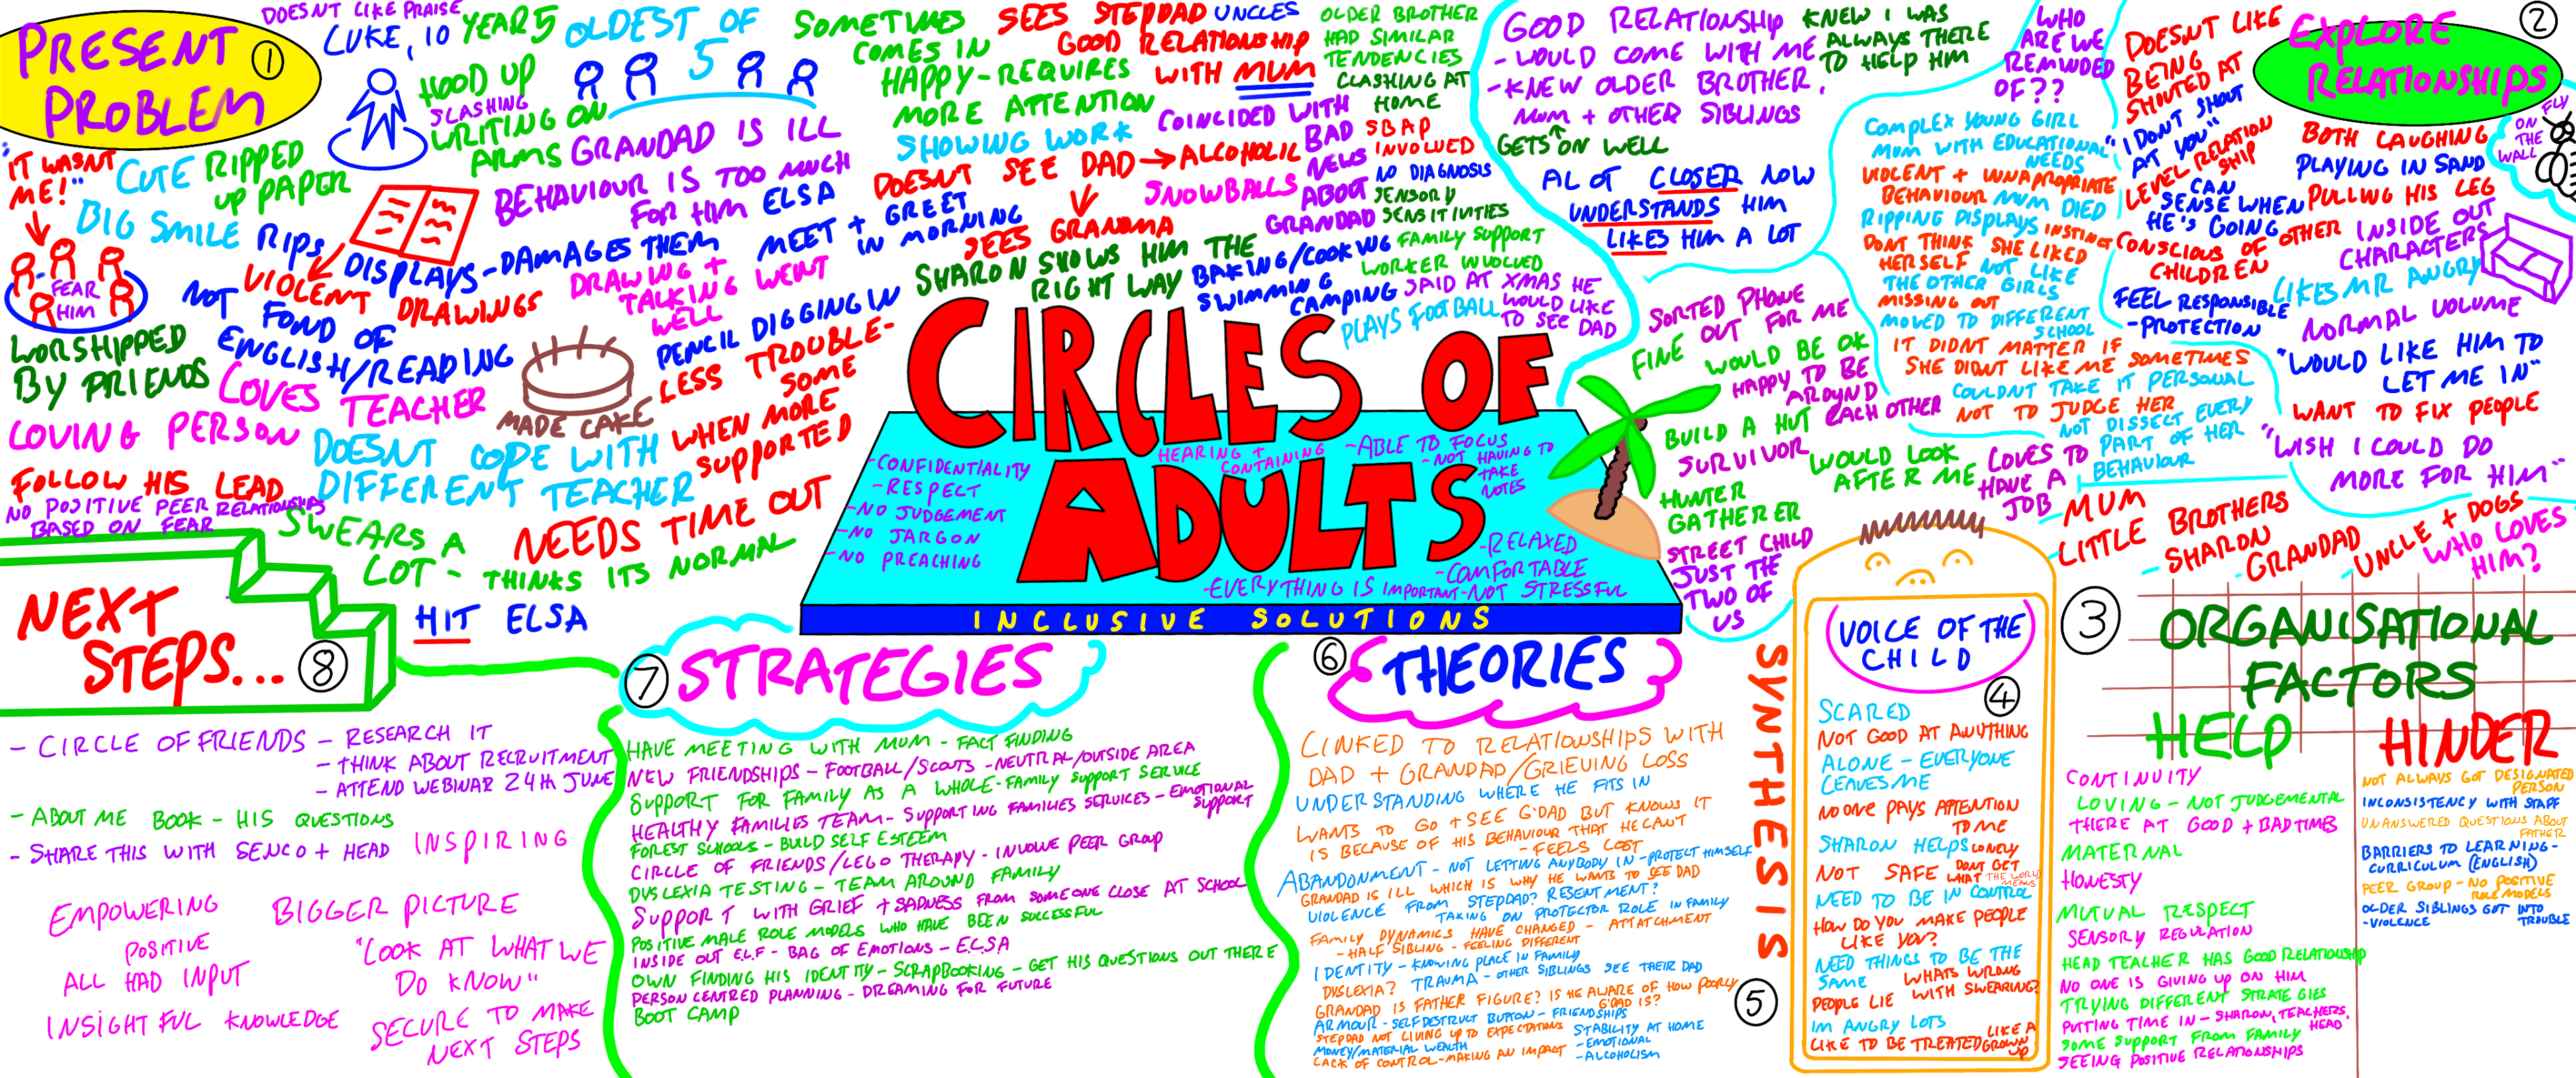 Problem solving in depth - the Circle of Adults process